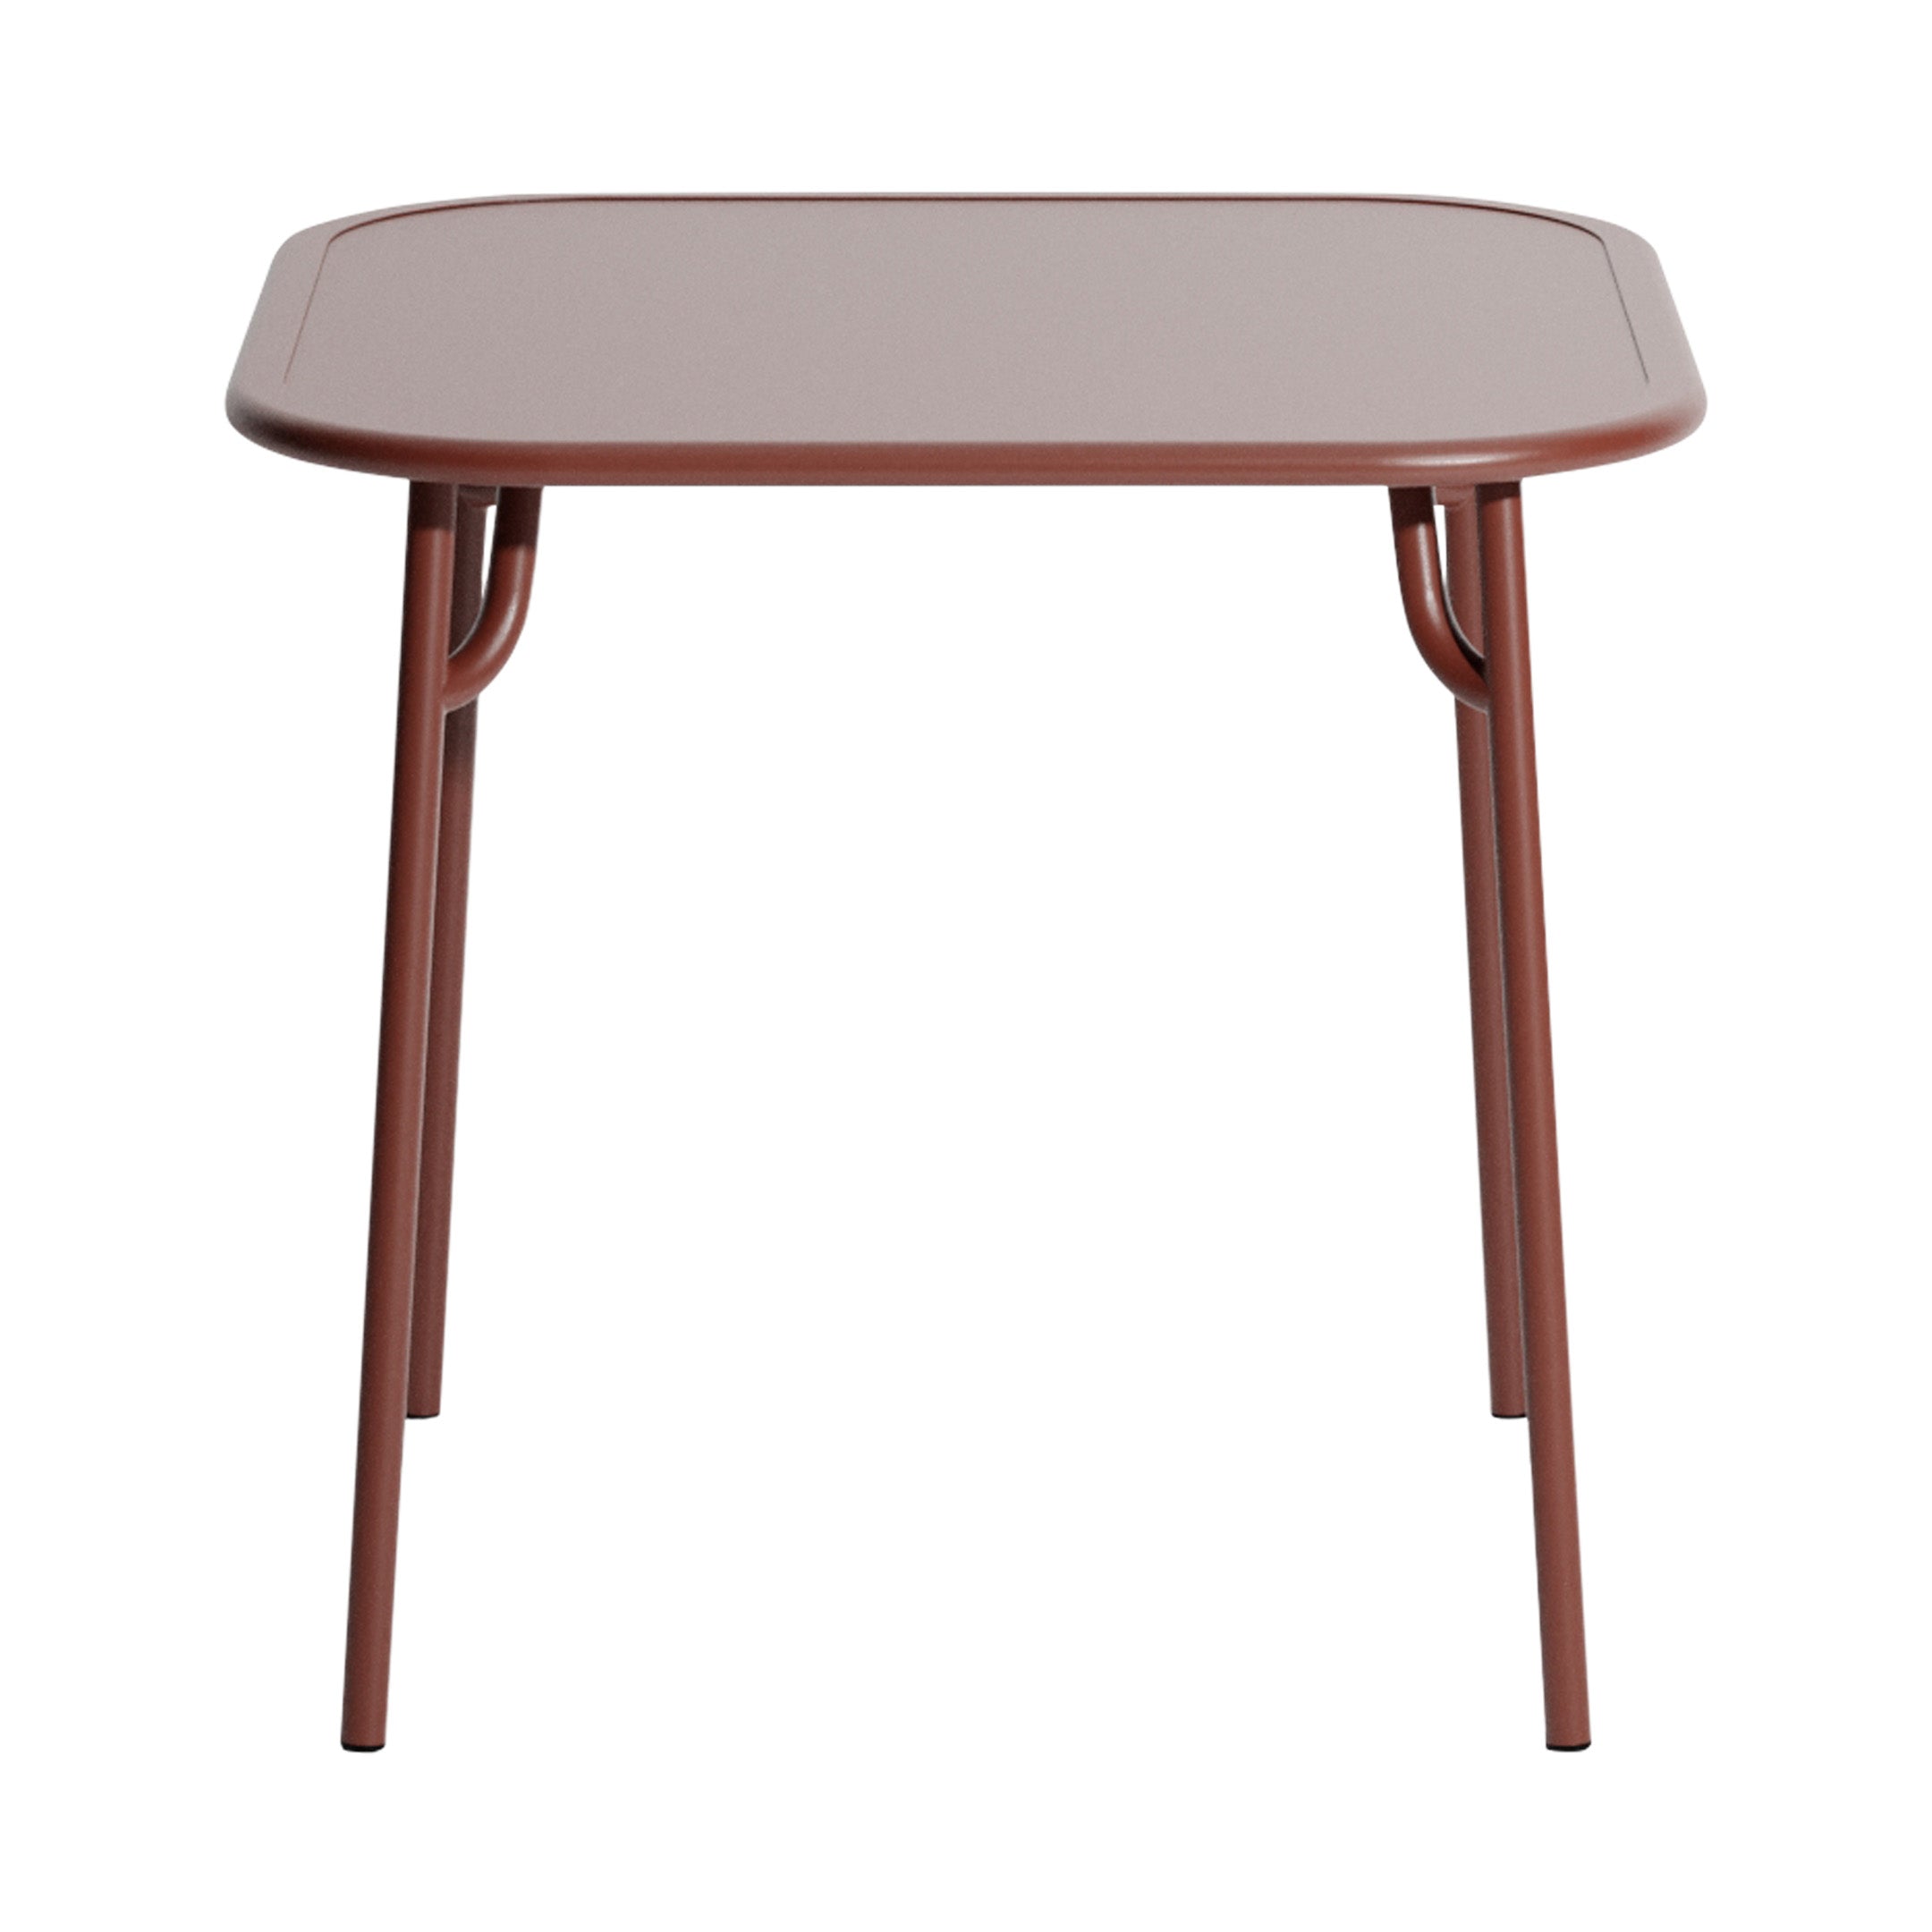 Week-End Square Dining Table: Brown Red